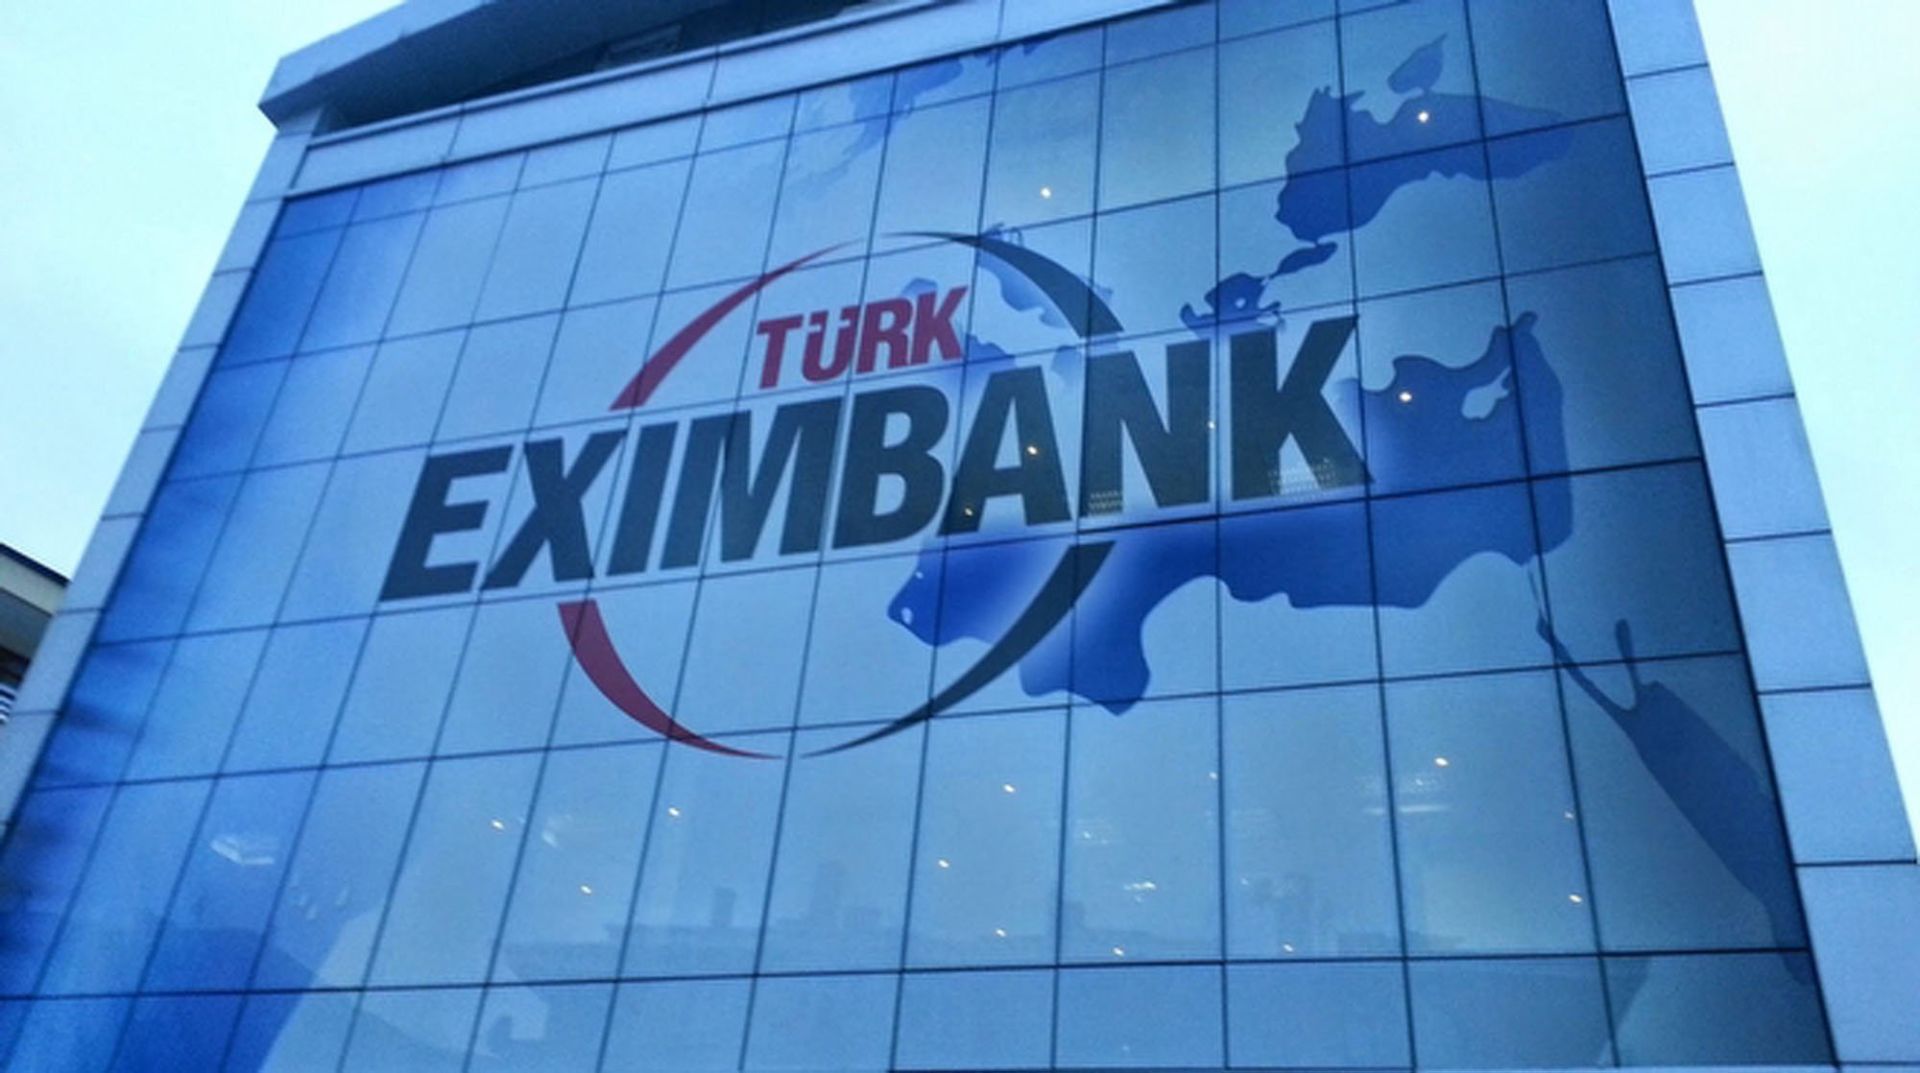 Turk Eximbank expands flow of foreign investment